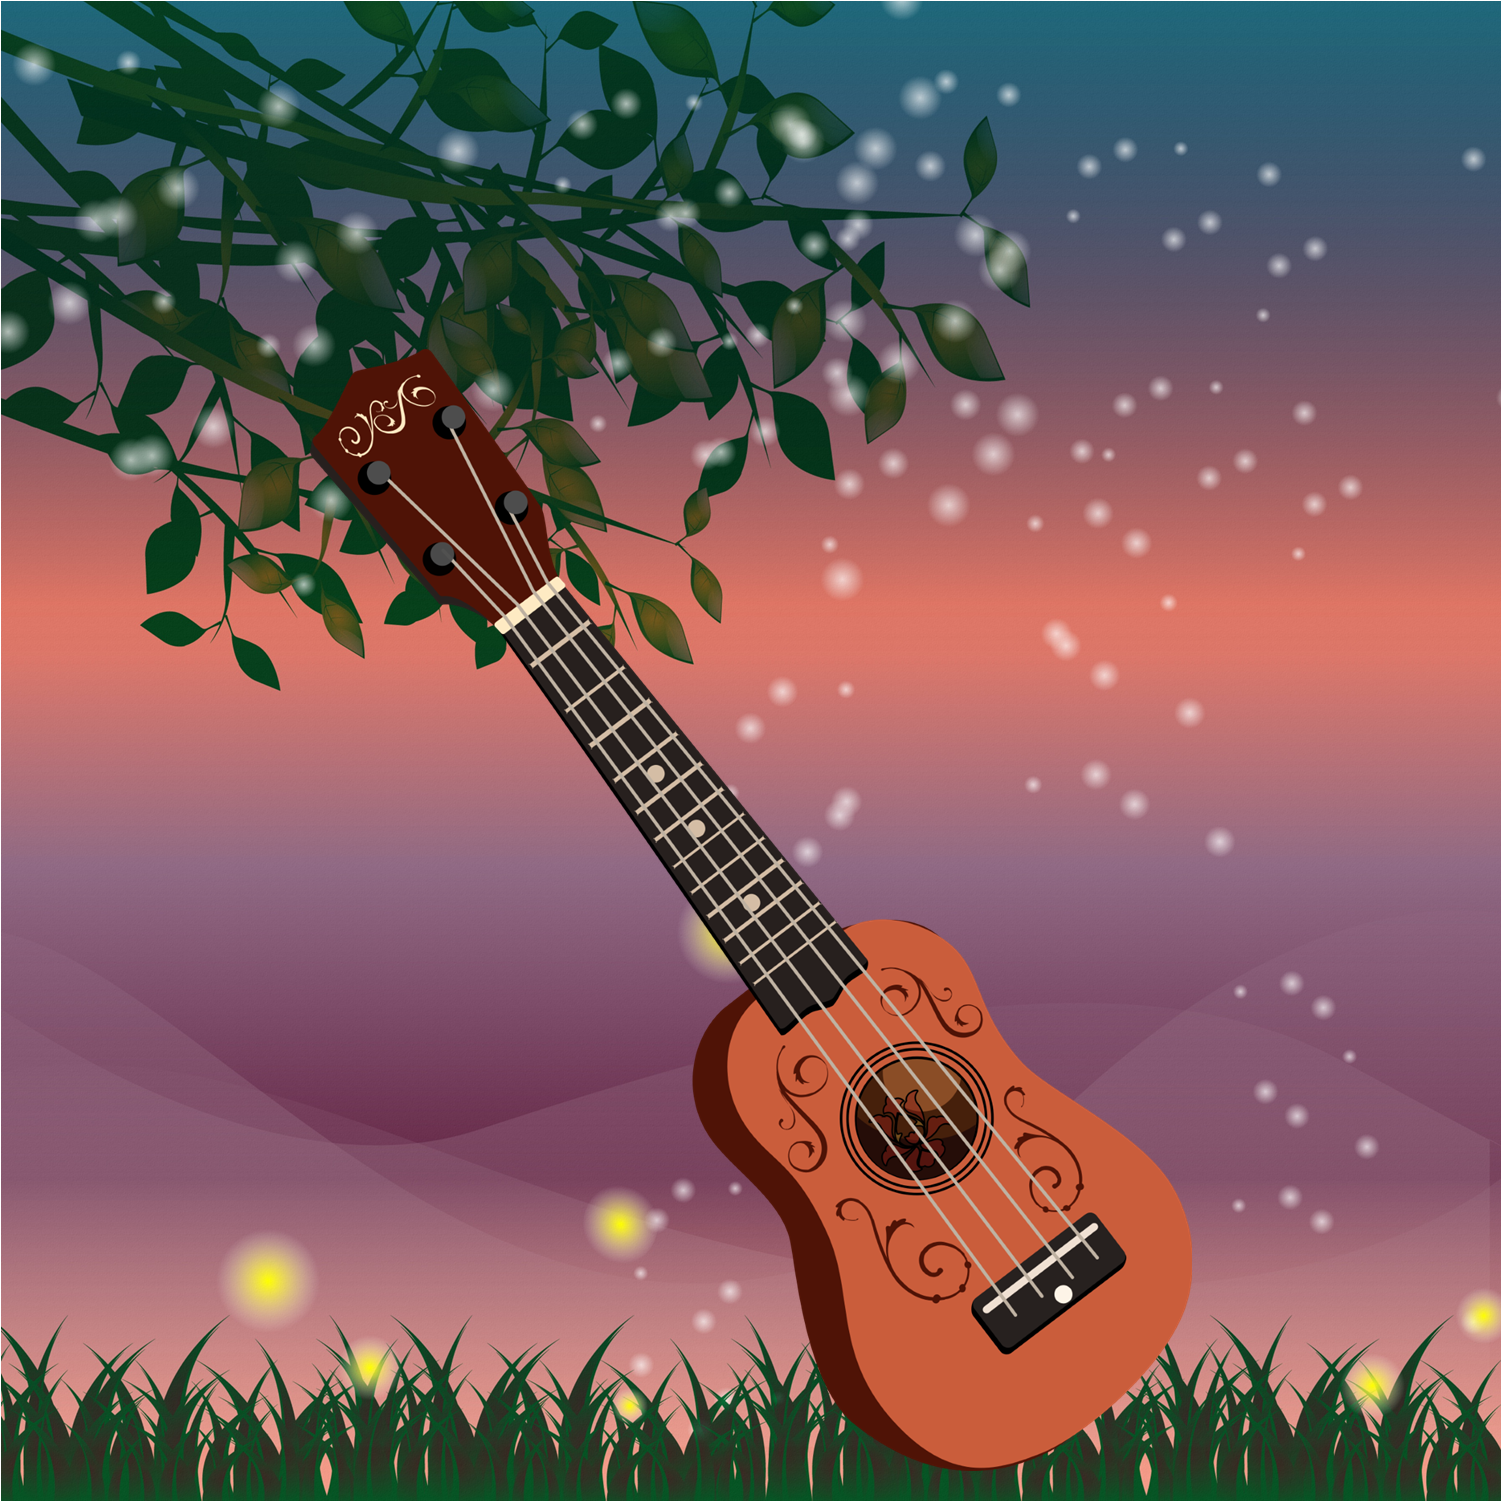 Illusstrated landscape with fireflies and a ukelele.